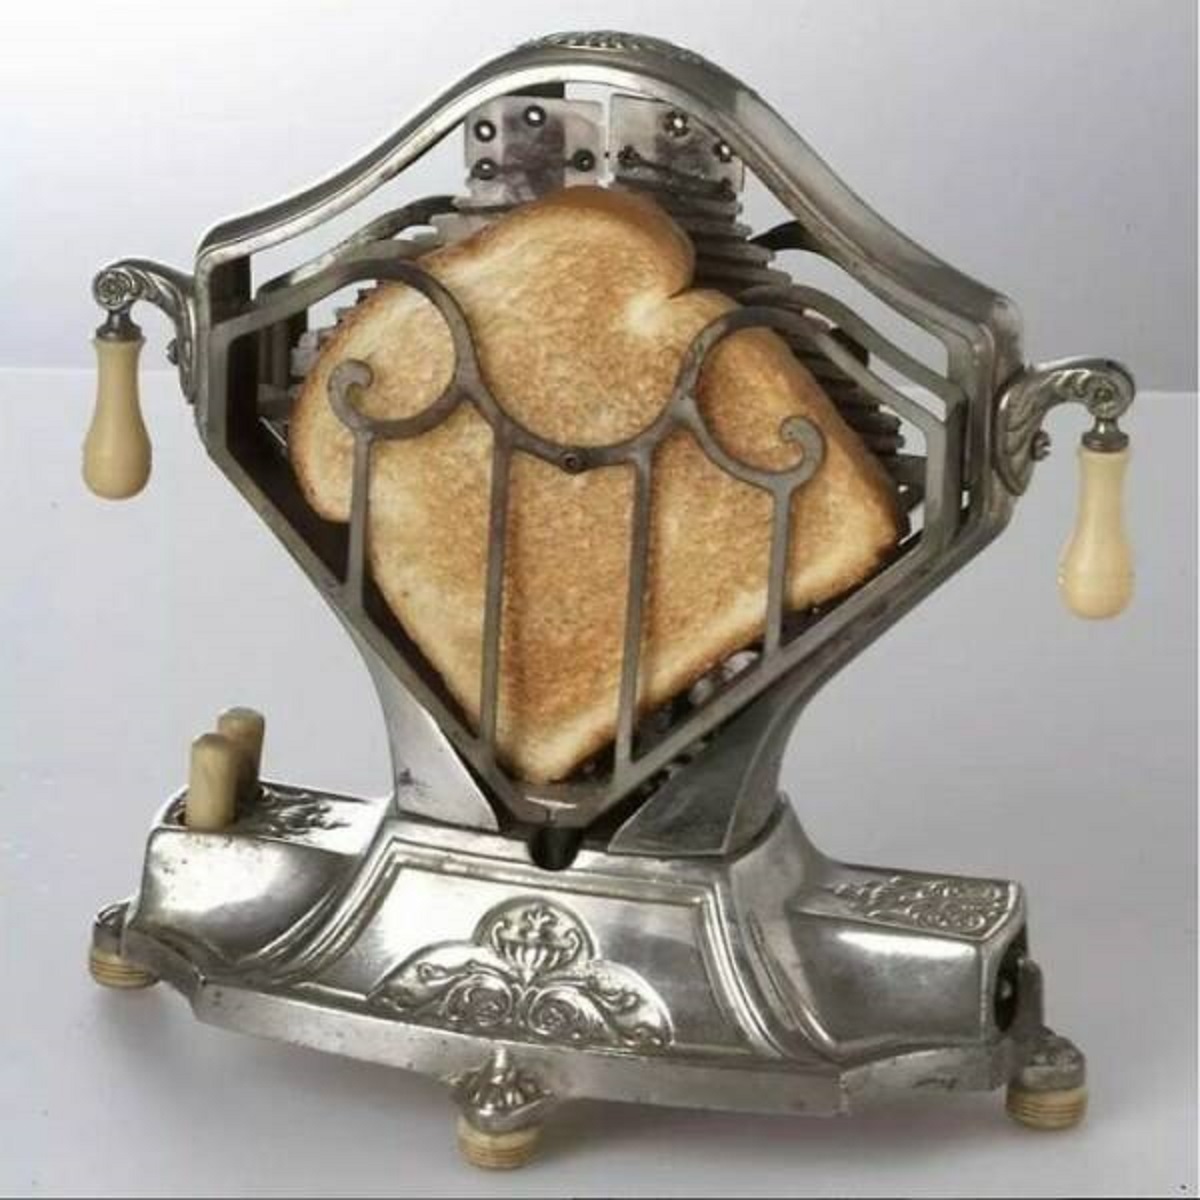 "The Sweetheart Toaster From The 1920s Represents An Interesting Piece Of Kitchen Technology From That Era"